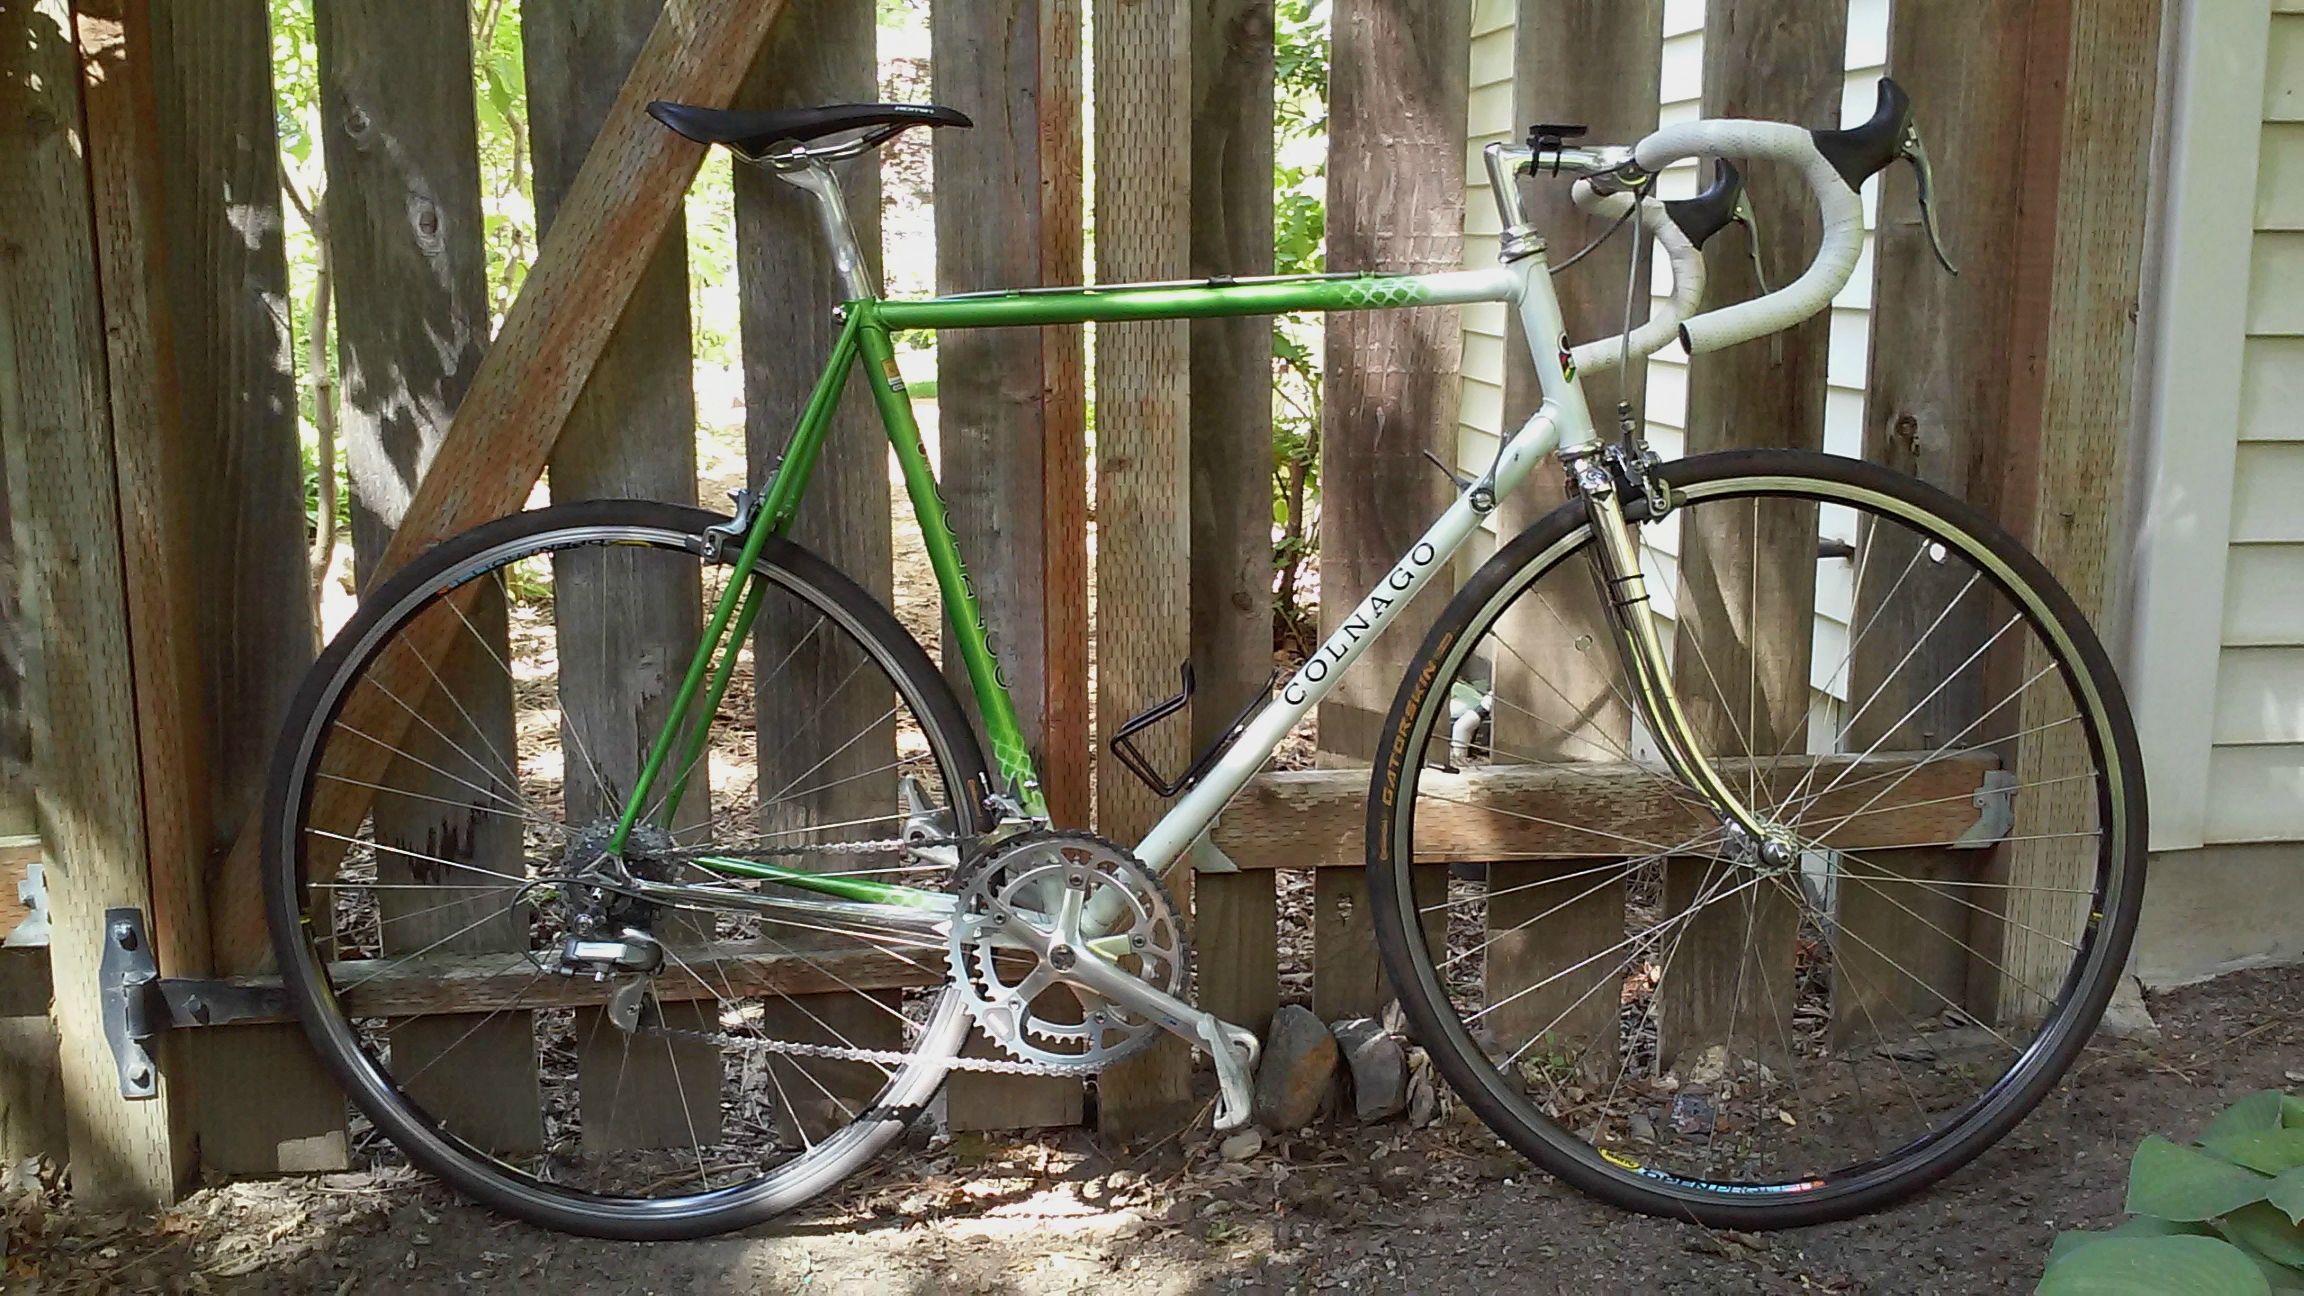 The New Classic Rigs and Rides Thread 1.1 - Page 67 - Bike Forums